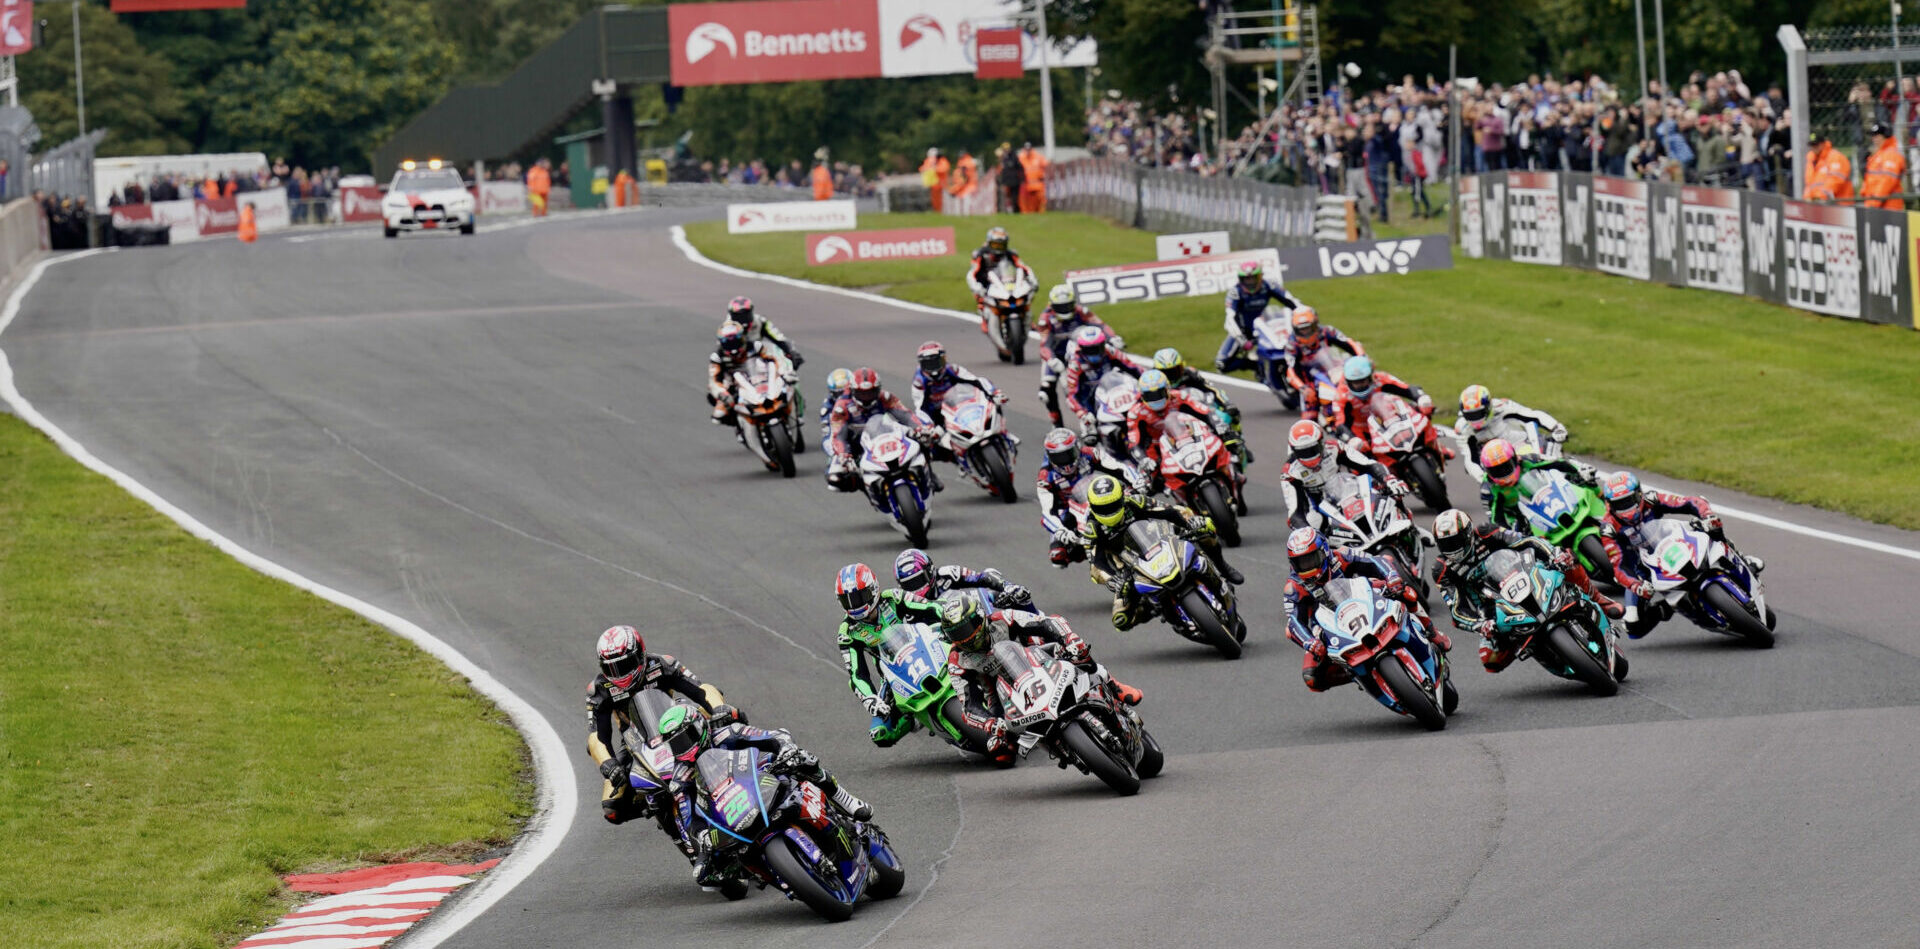 The start of a British Superbike race Sunday at Oulton Park with Jason O'Halloran (22) taking an early advantage. Photo courtesy MSVR.